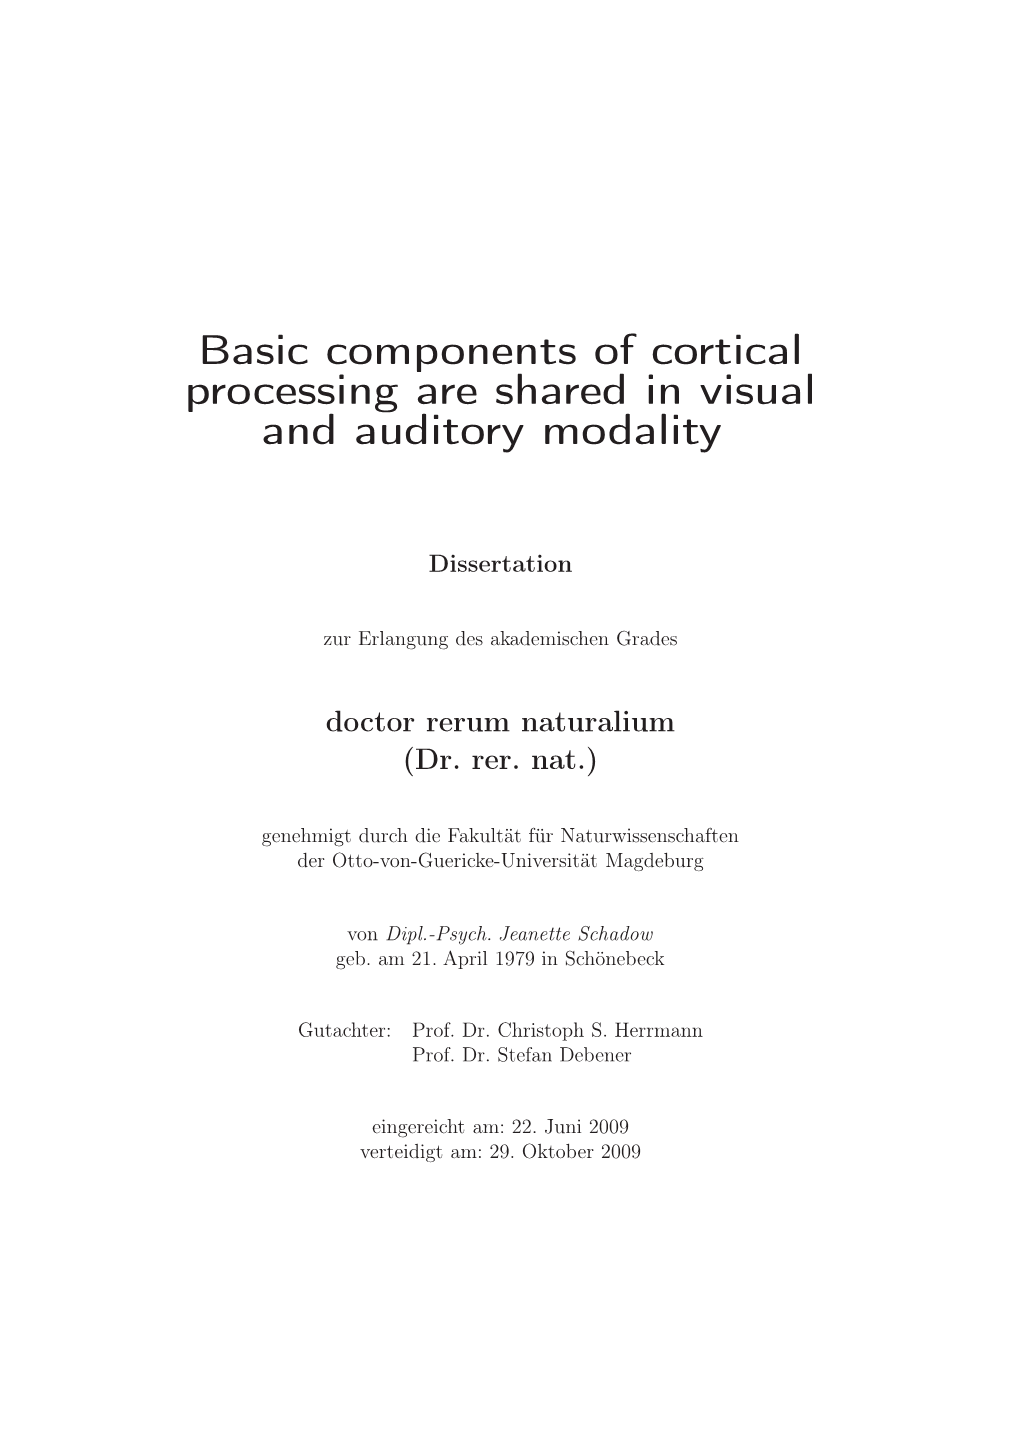 Basic Components of Cortical Processing Are Shared in Visual and Auditory Modality